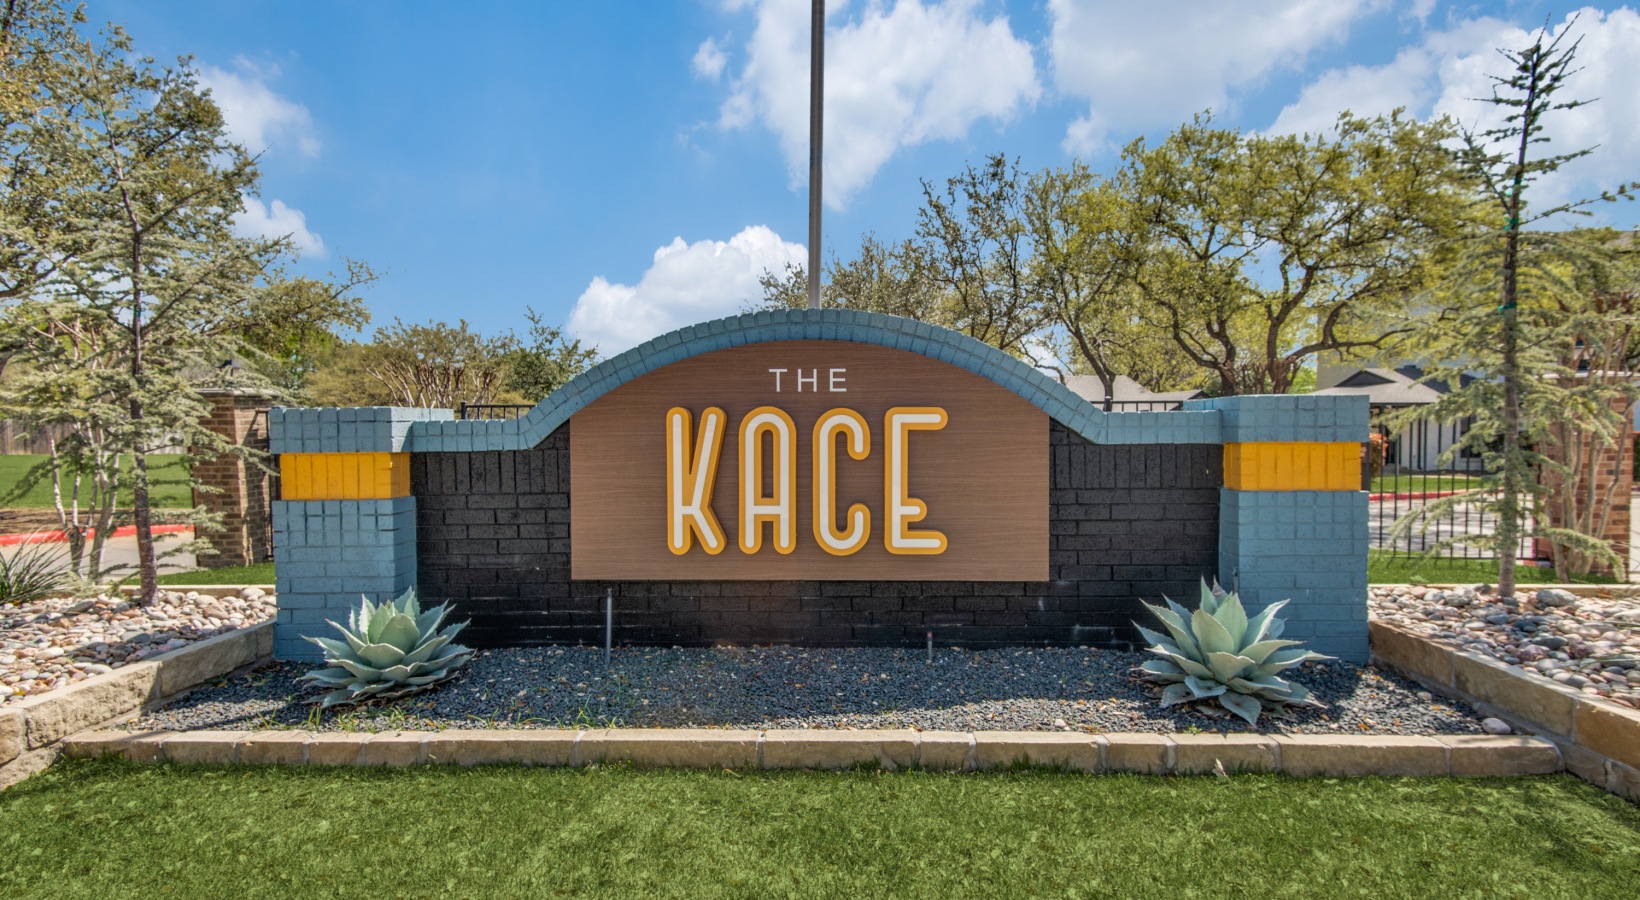 the kace sign in front of a grassy area at The  Kace